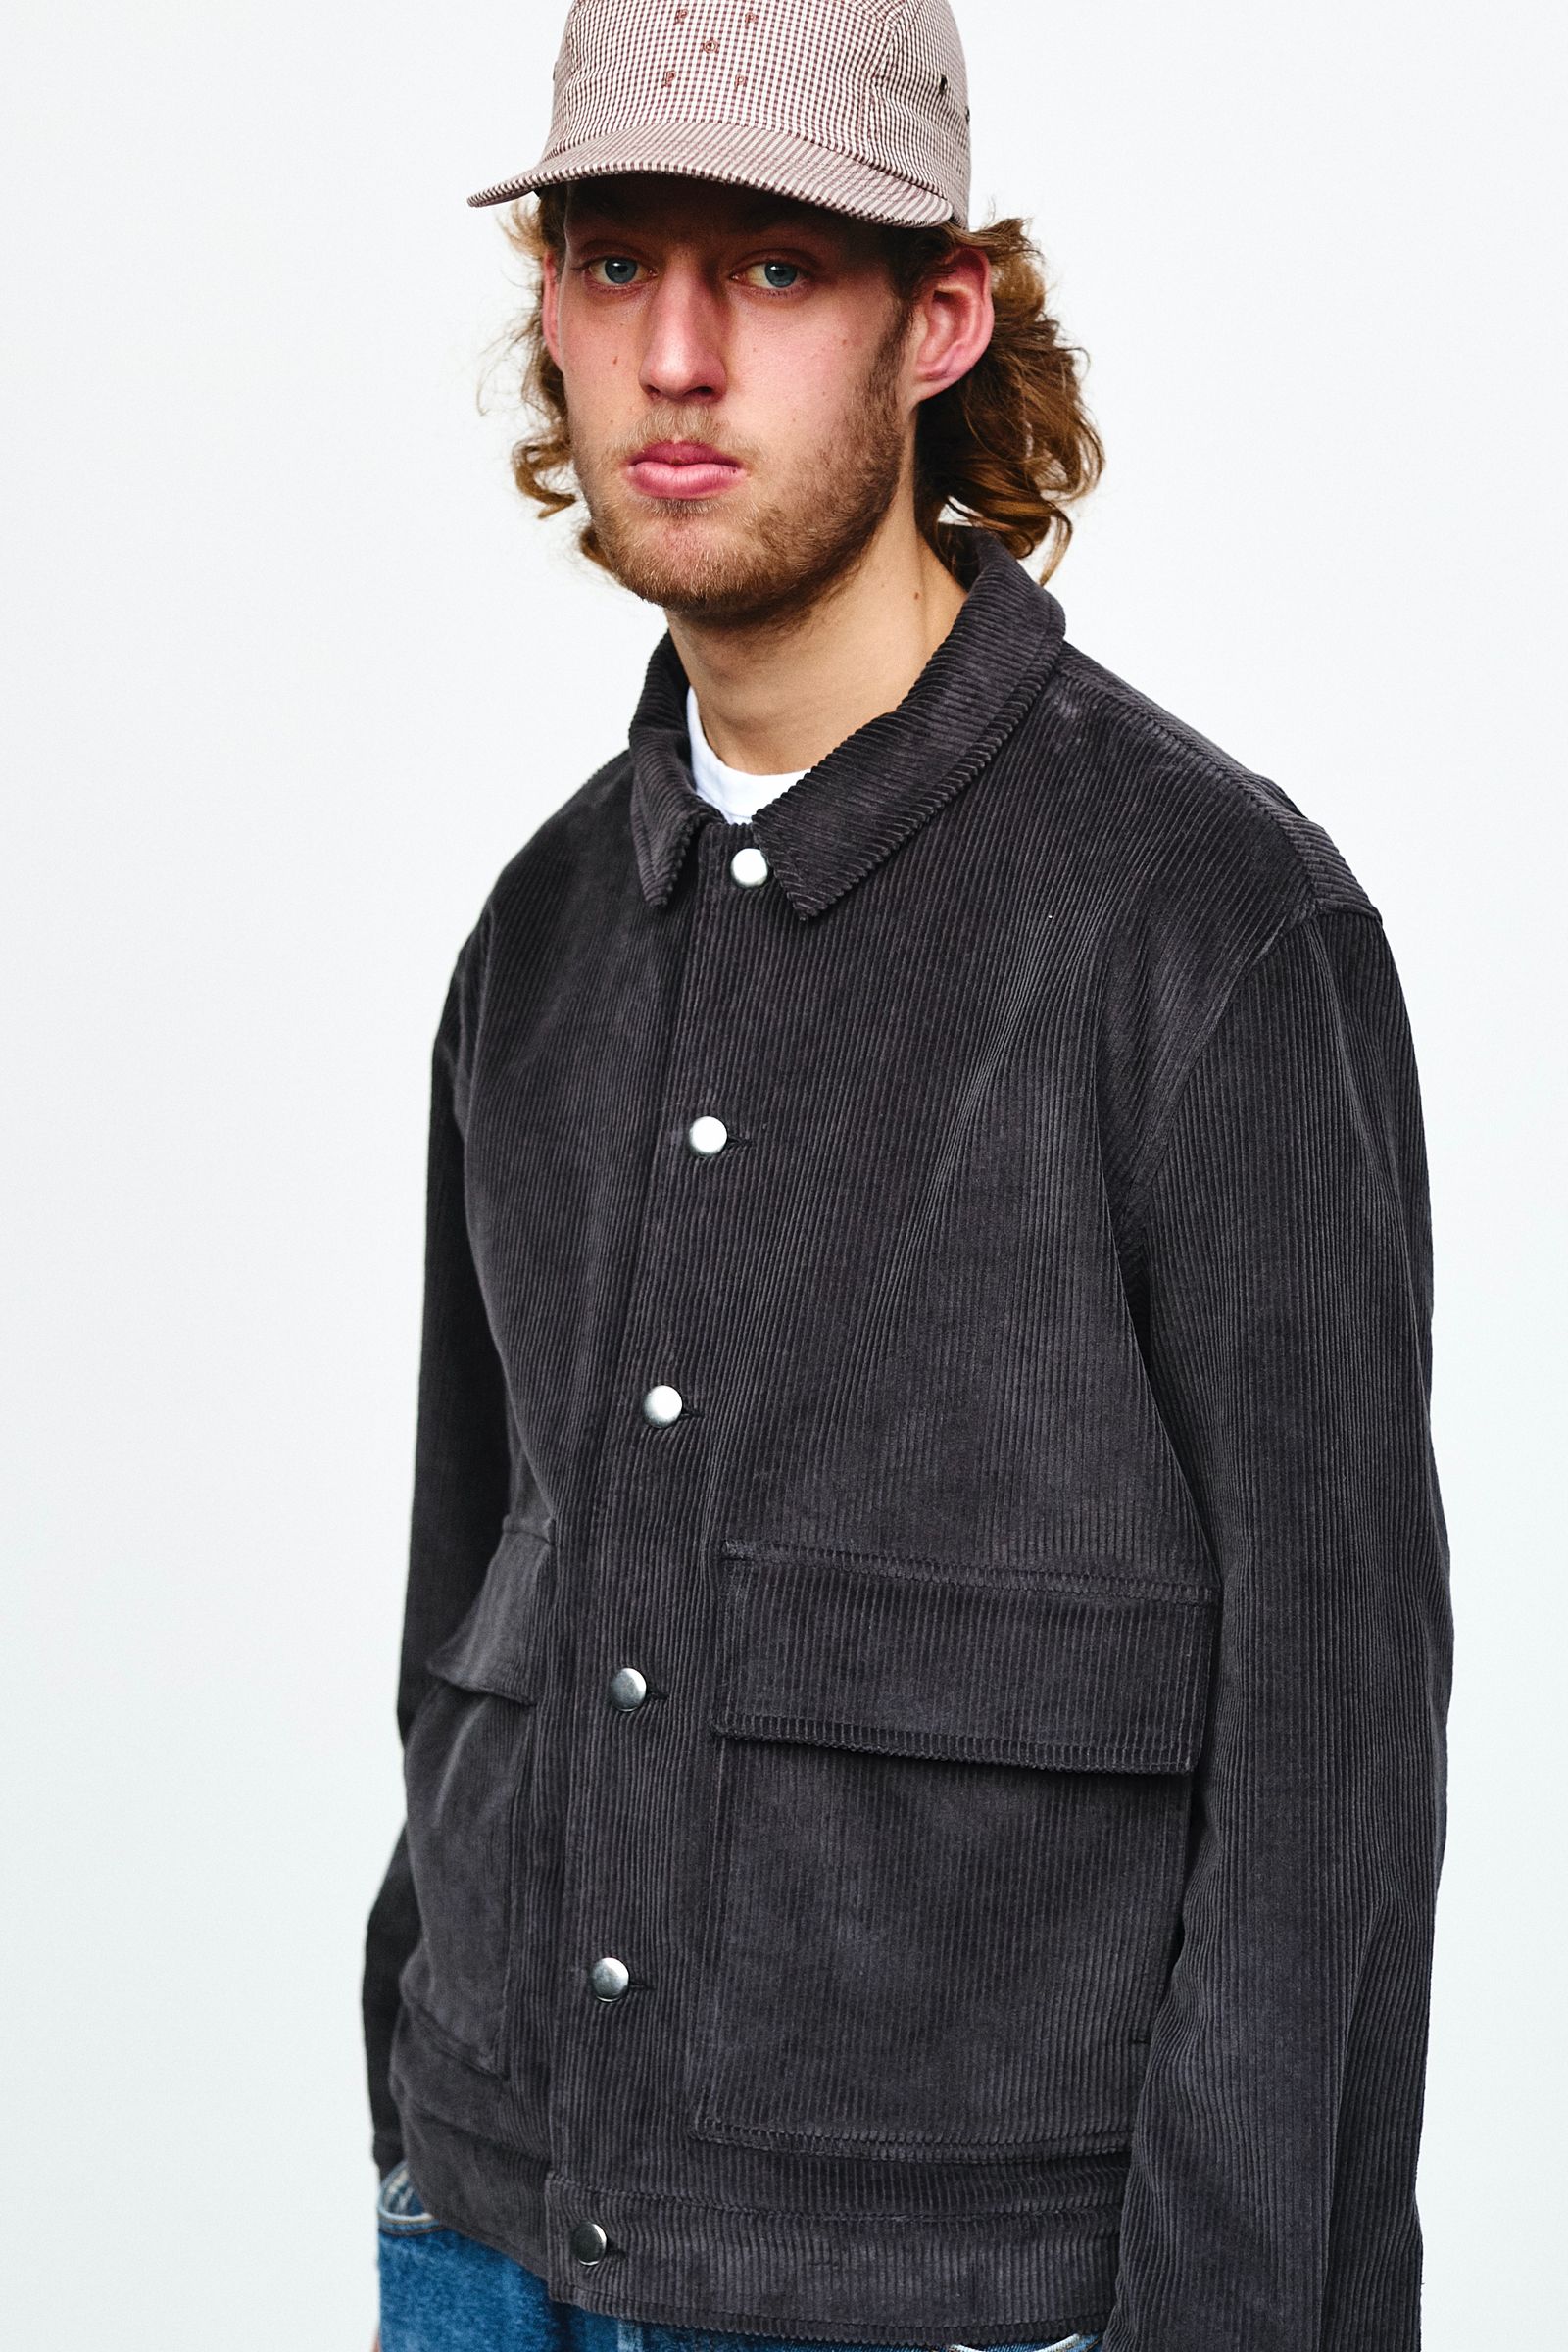 Pop Trading Company - full button jacket 21aw | asterisk